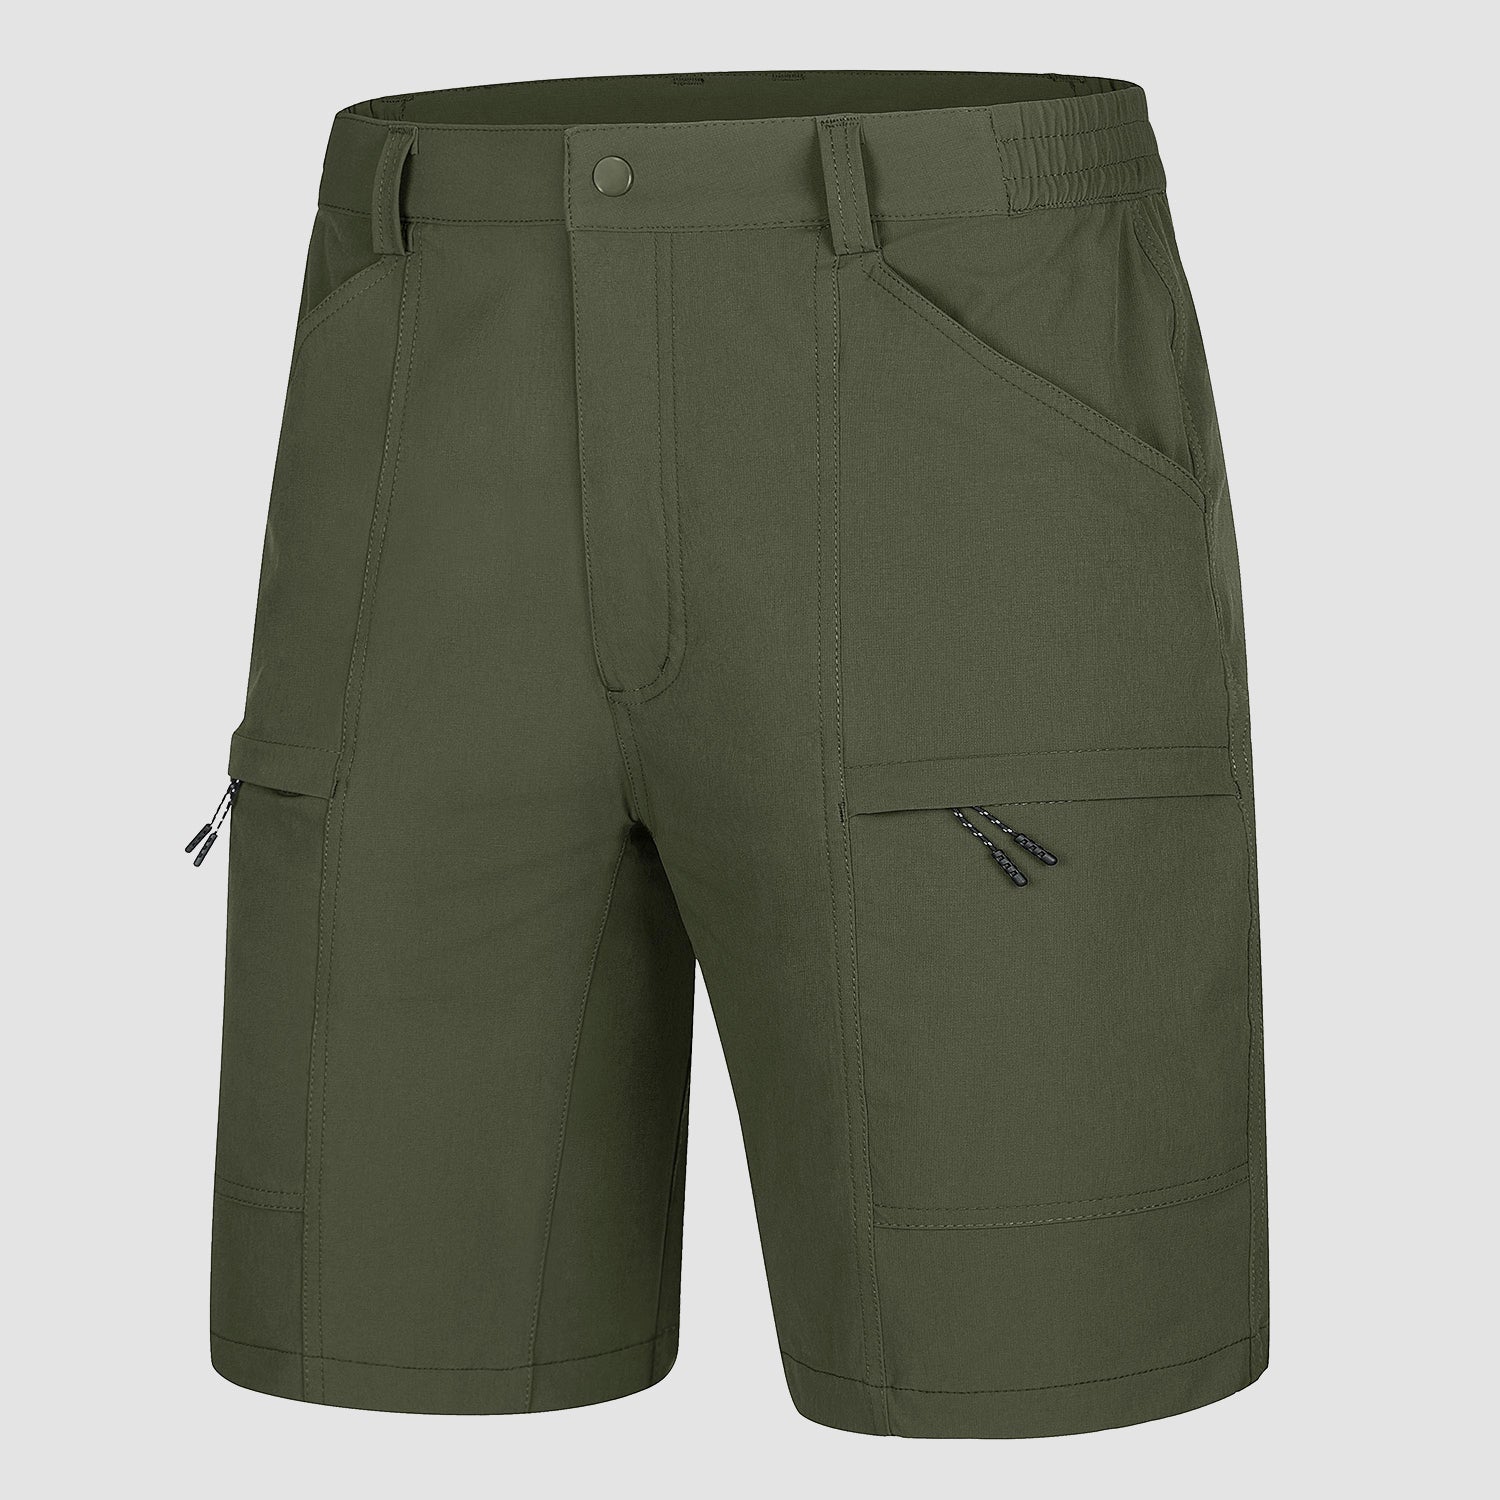 Men's Cargo Shorts Ripstop Quick Dry Sports Shorts, Army Green / 34